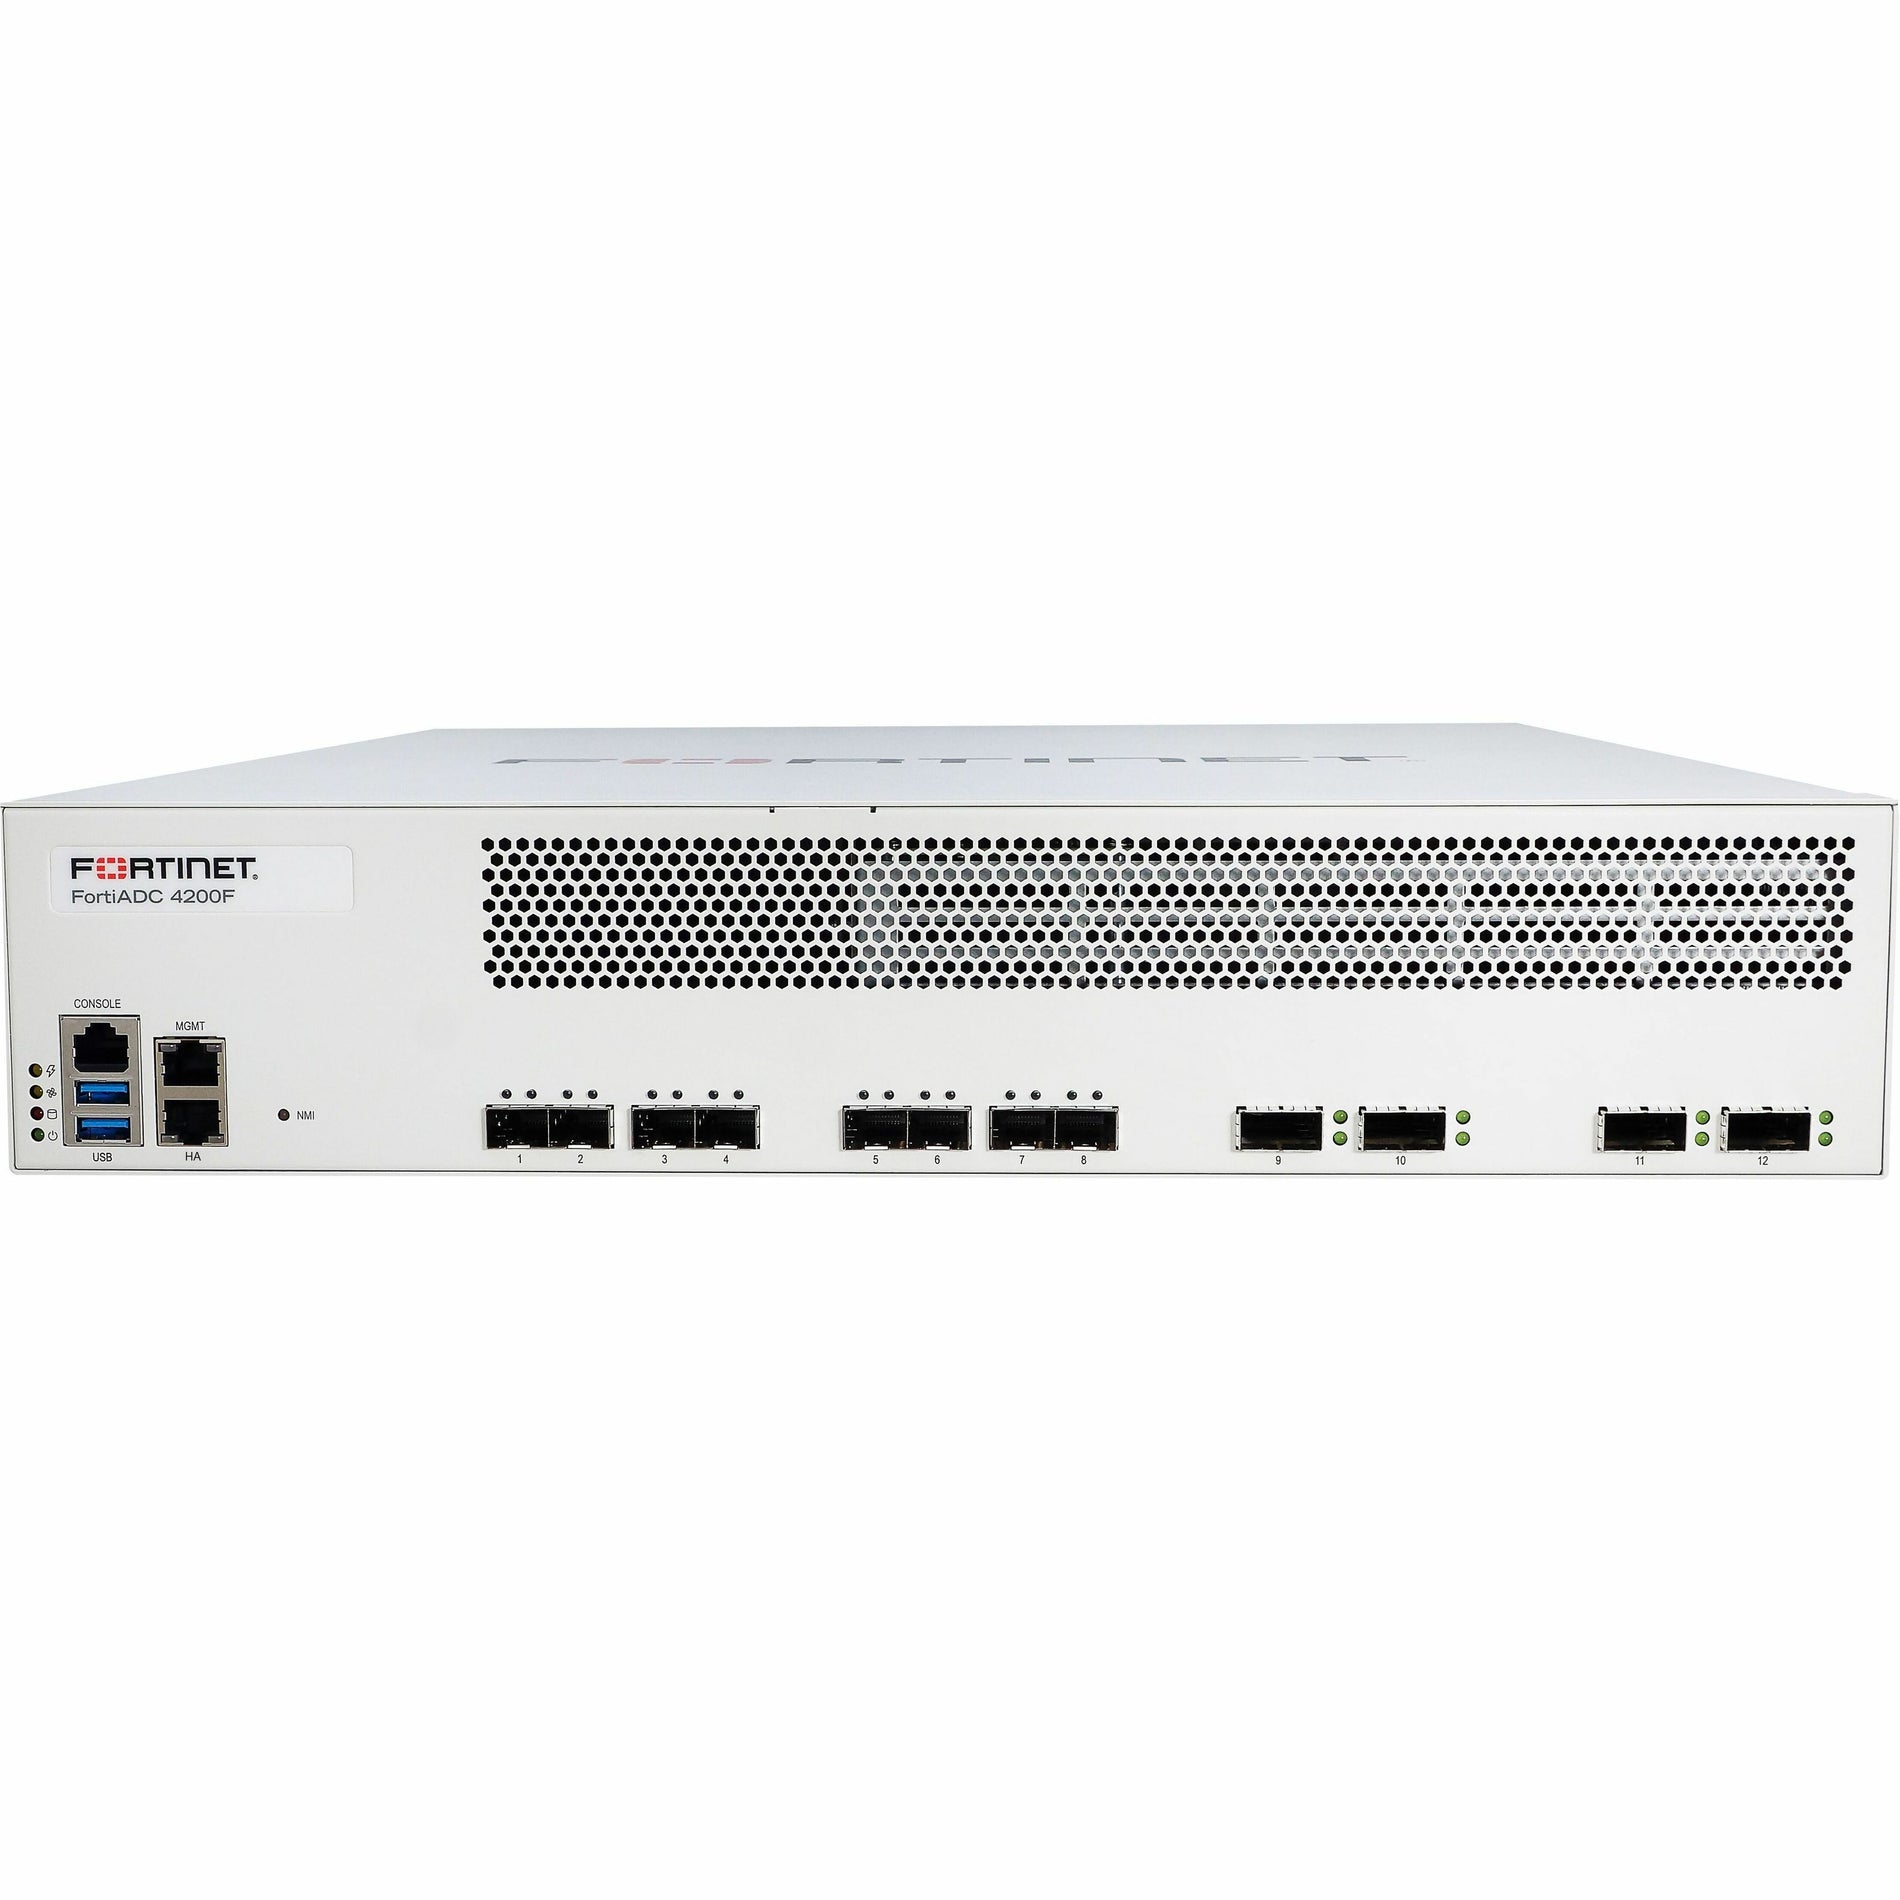 Fortinet FAD-4200F FortiADC Network Security Appliance, Application Security, DDoS Protection, SSL Offloading, Antivirus, and More